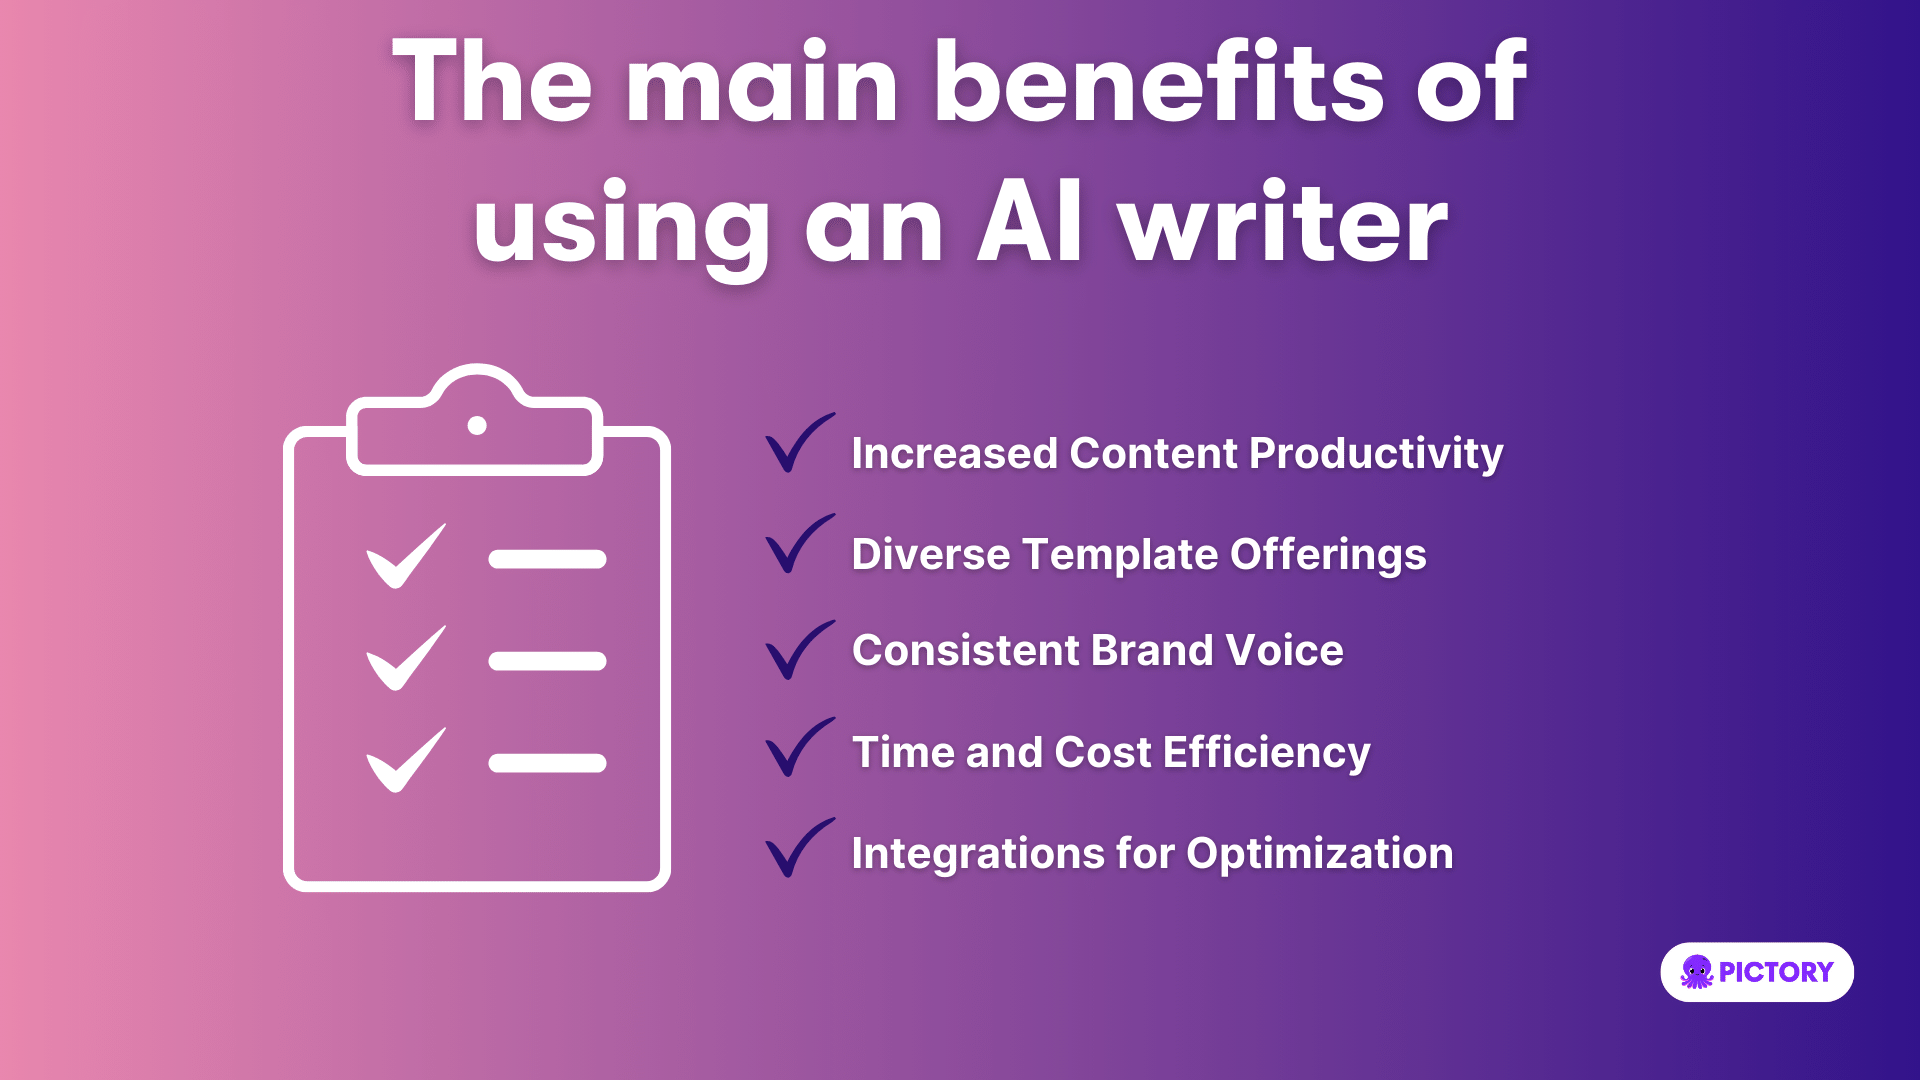 The main benefits of using an AI writer